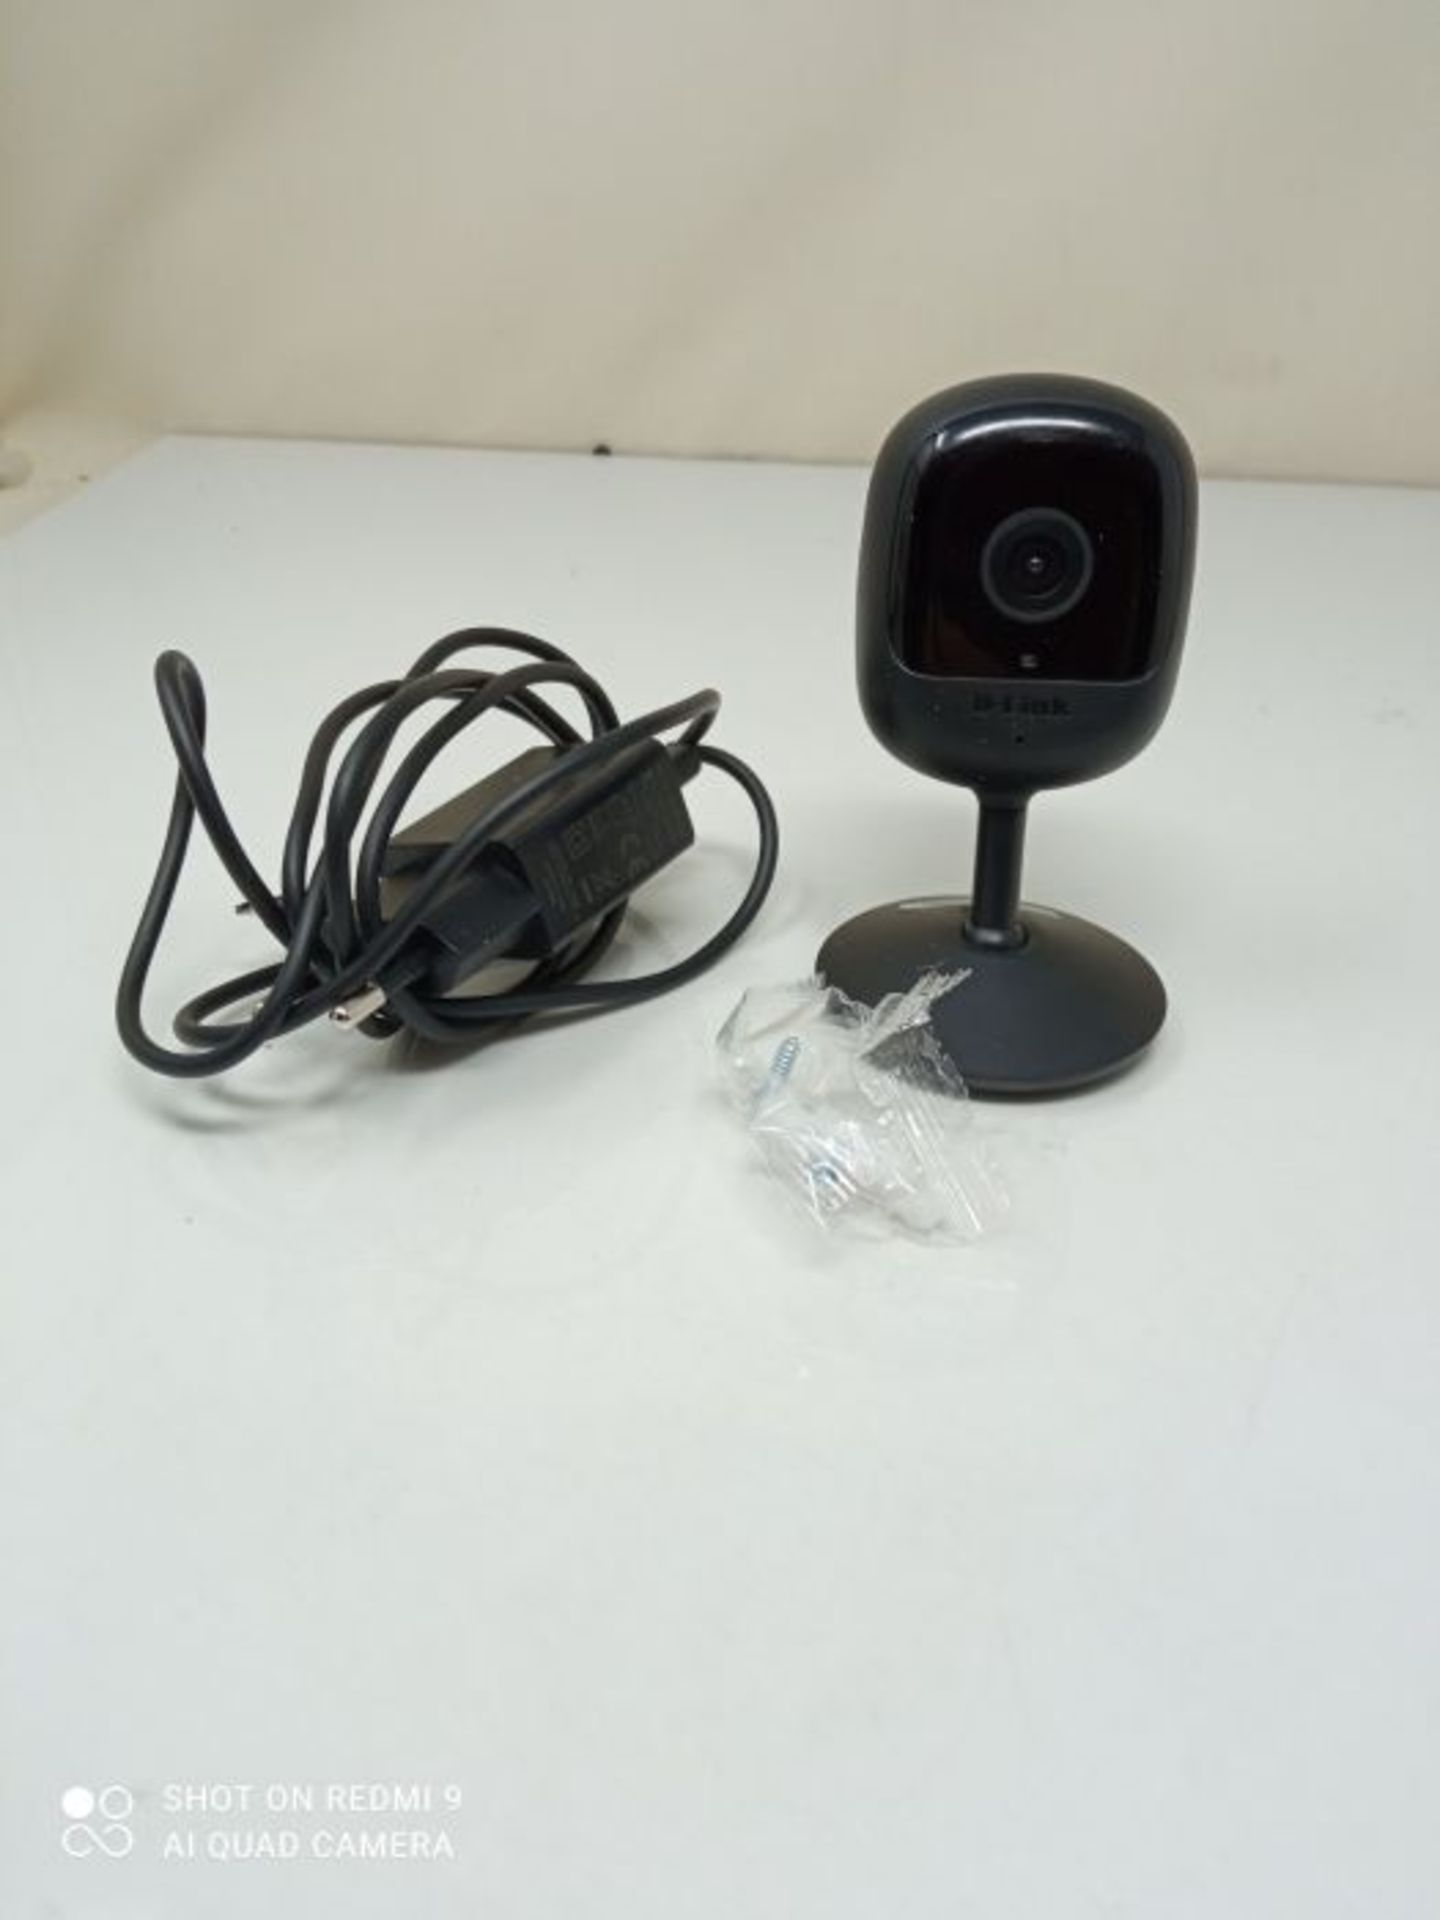 D-Link Compact FHD Wi-Fi Camera - Image 3 of 3